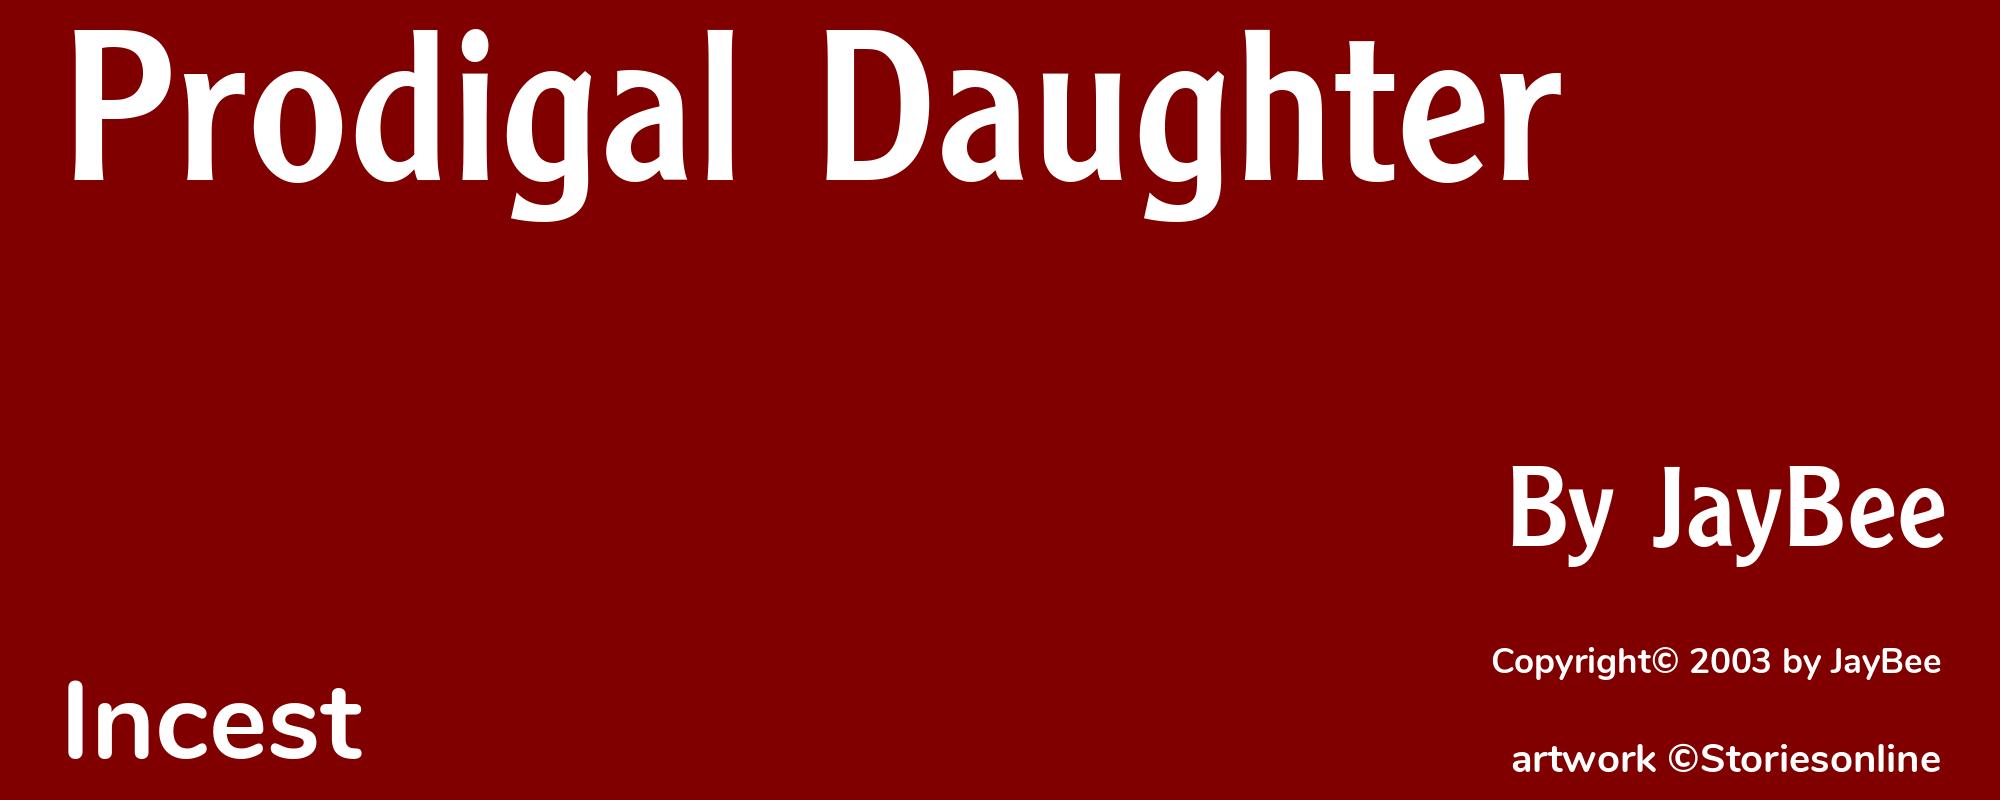 Prodigal Daughter - Cover